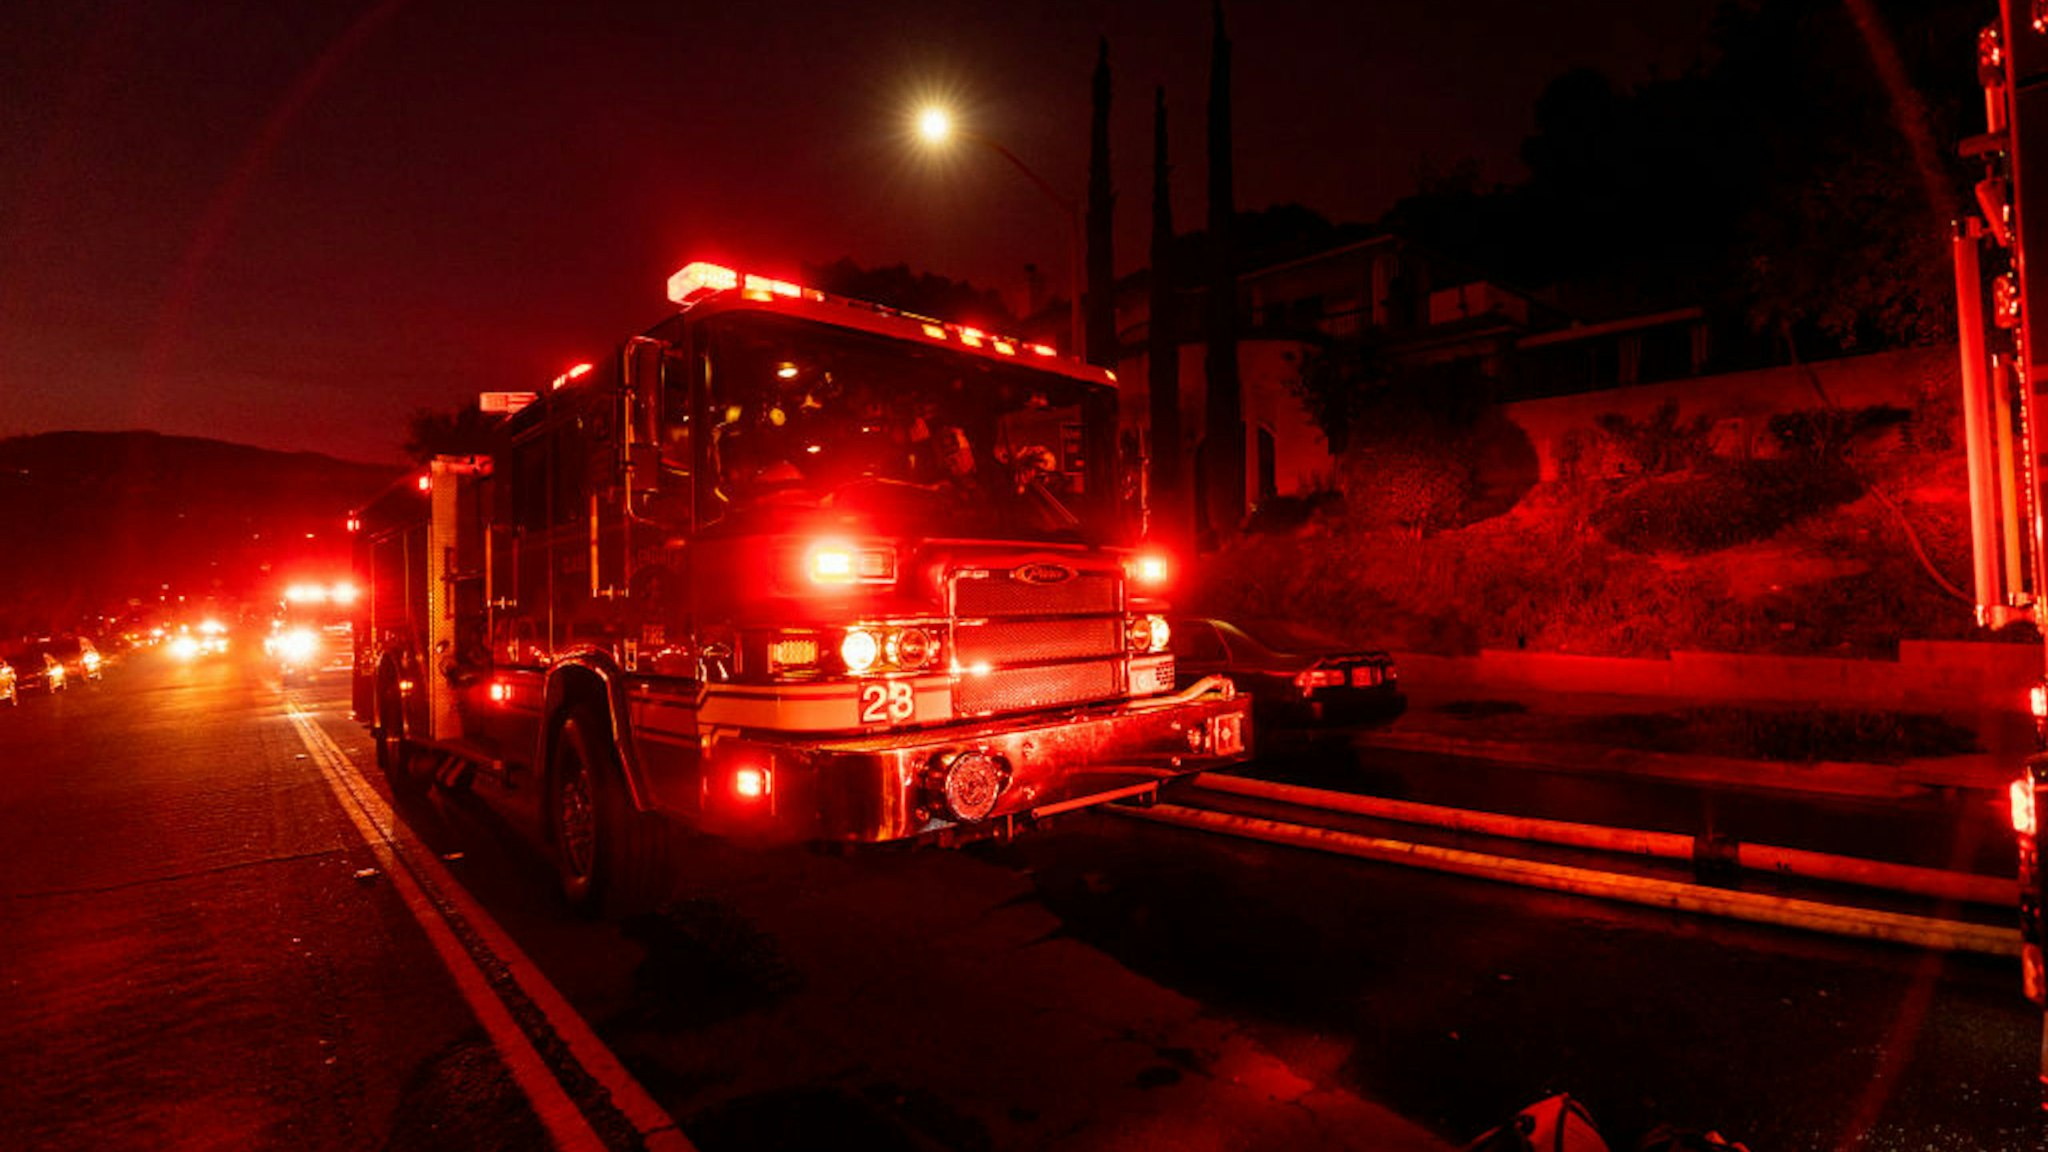 Firetrucks seen during a wildfire in Glendale near Los Angeles, California on August 25, 2019.